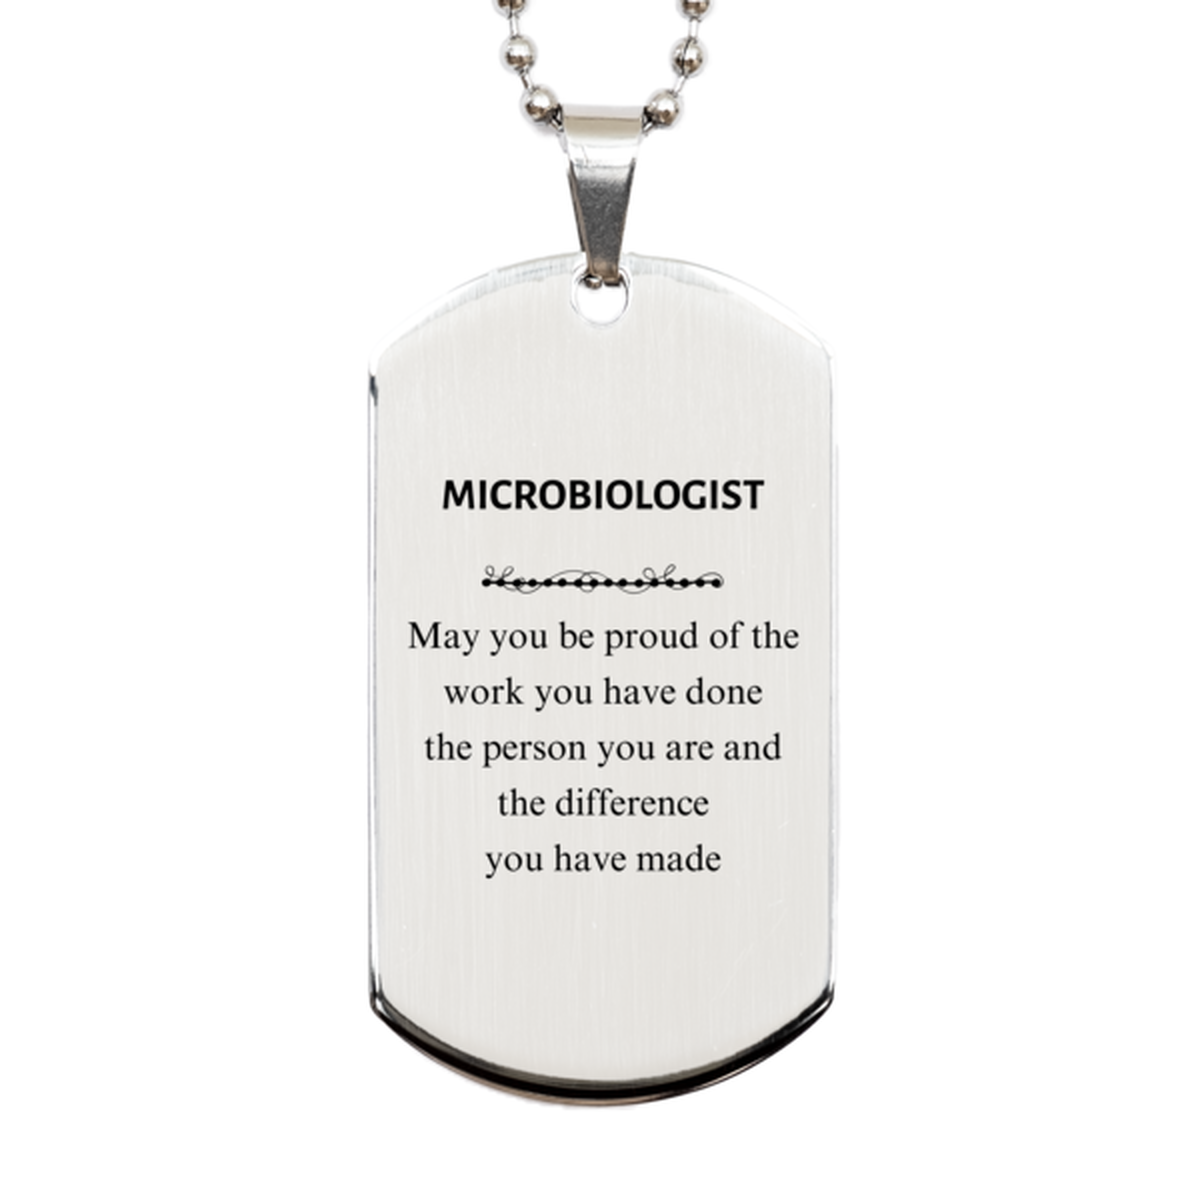 Microbiologist May you be proud of the work you have done, Retirement Microbiologist Silver Dog Tag for Colleague Appreciation Gifts Amazing for Microbiologist